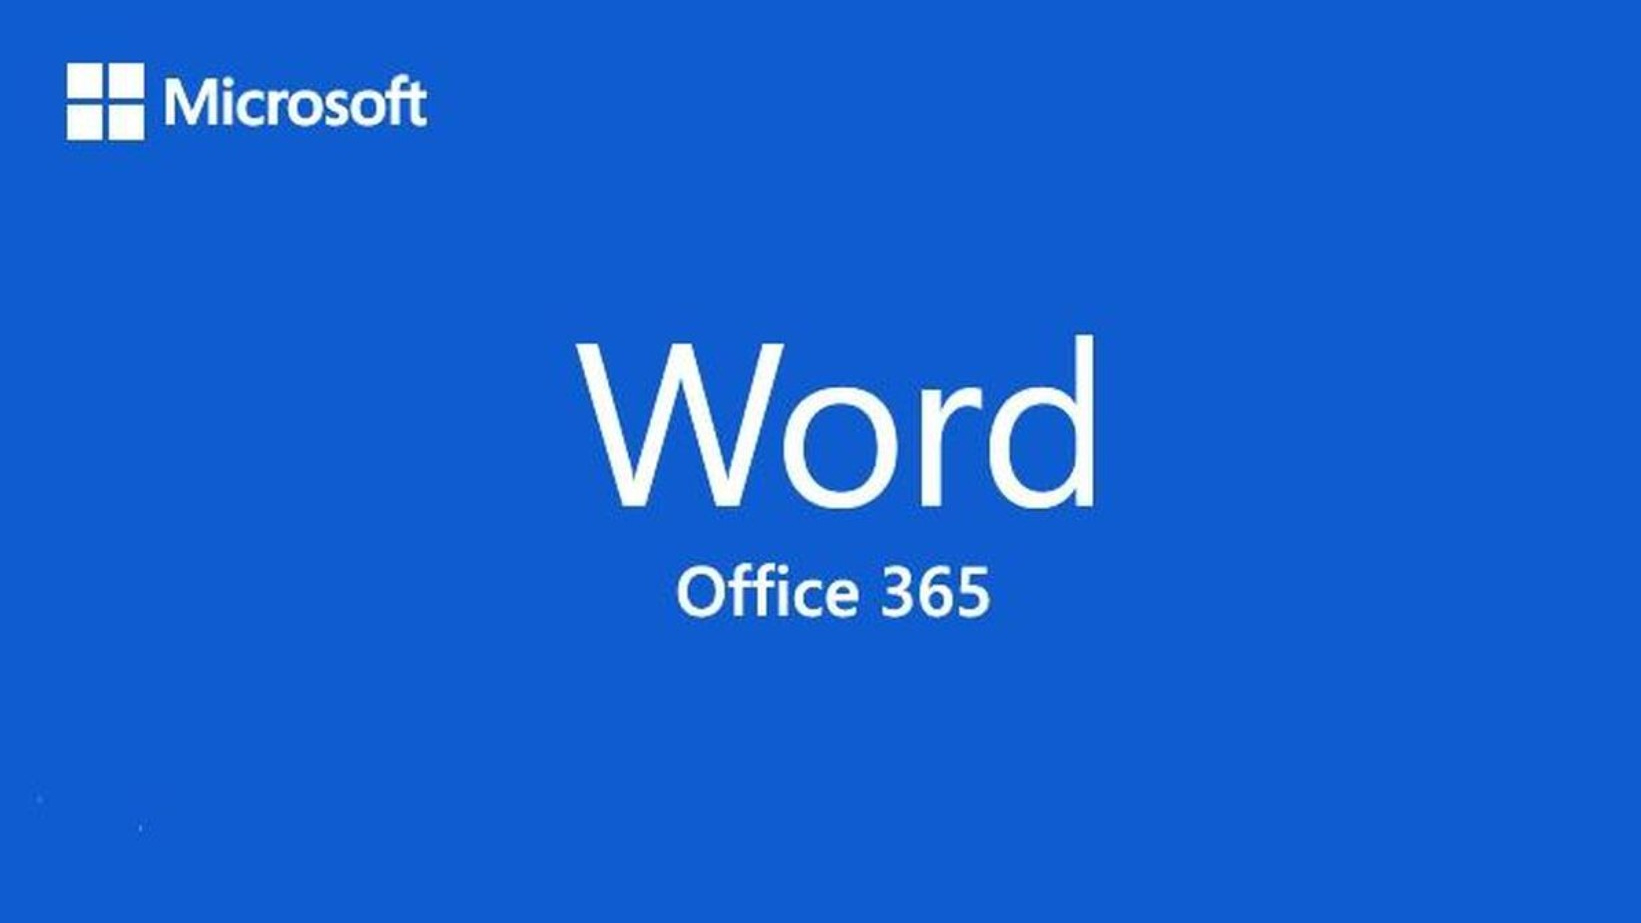 Office word can. Microsoft Office Word 2019 Интерфейс. MS Word Интерфейс 2019. Интерфейс Microsoft Office Word 2019/2016. Микрософт офис ворд 2019.